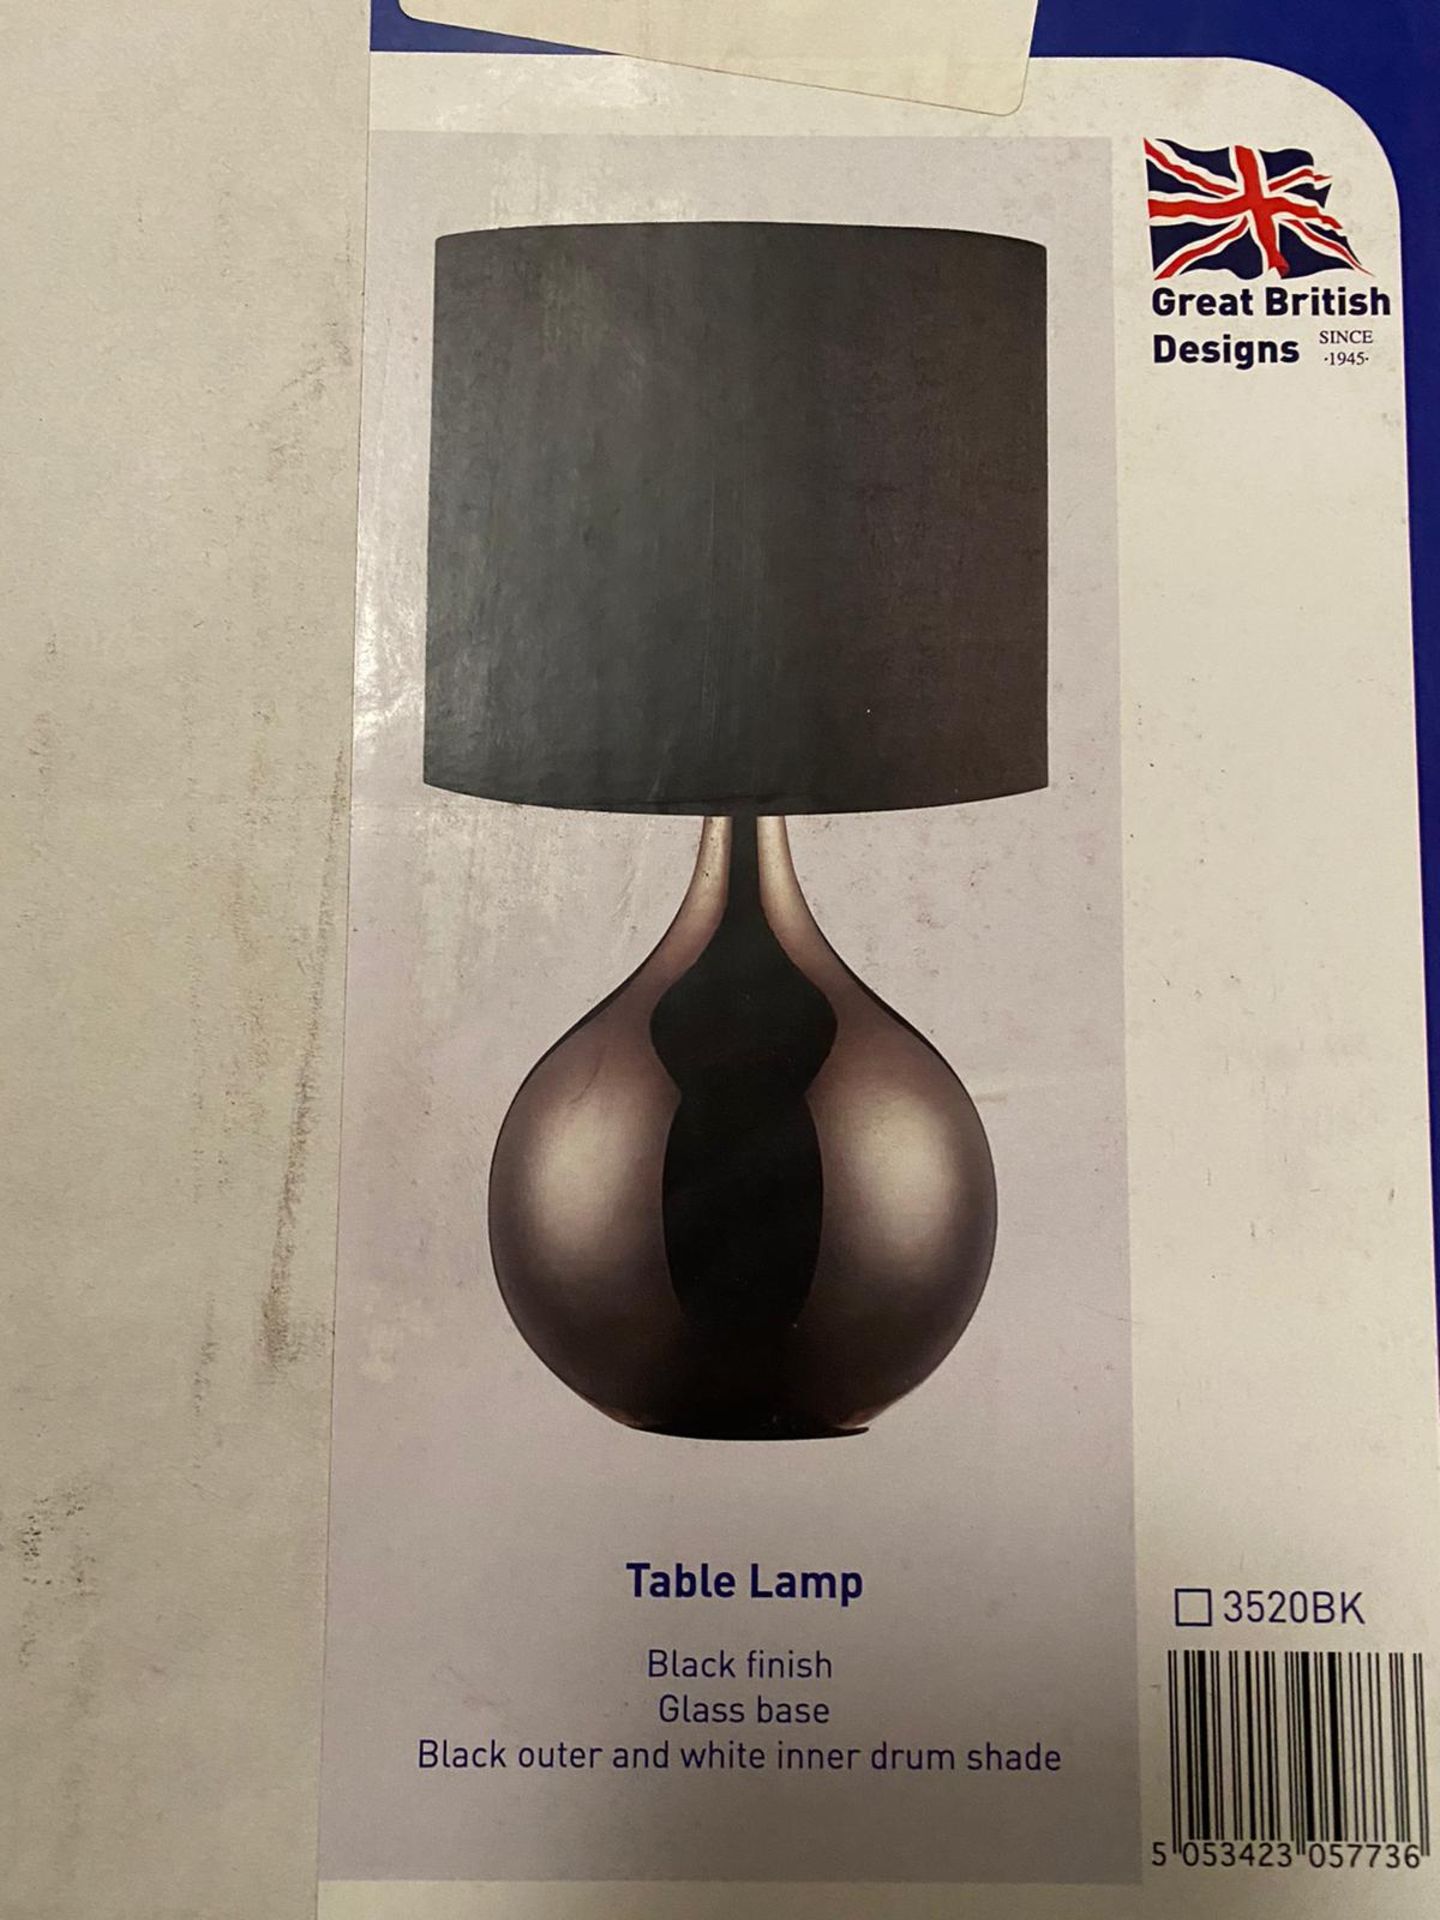 1 x Searchlight Table Lamp in black with a glass base - Ref: 3520BK - New and Boxed - RRP: £80 - Image 4 of 4